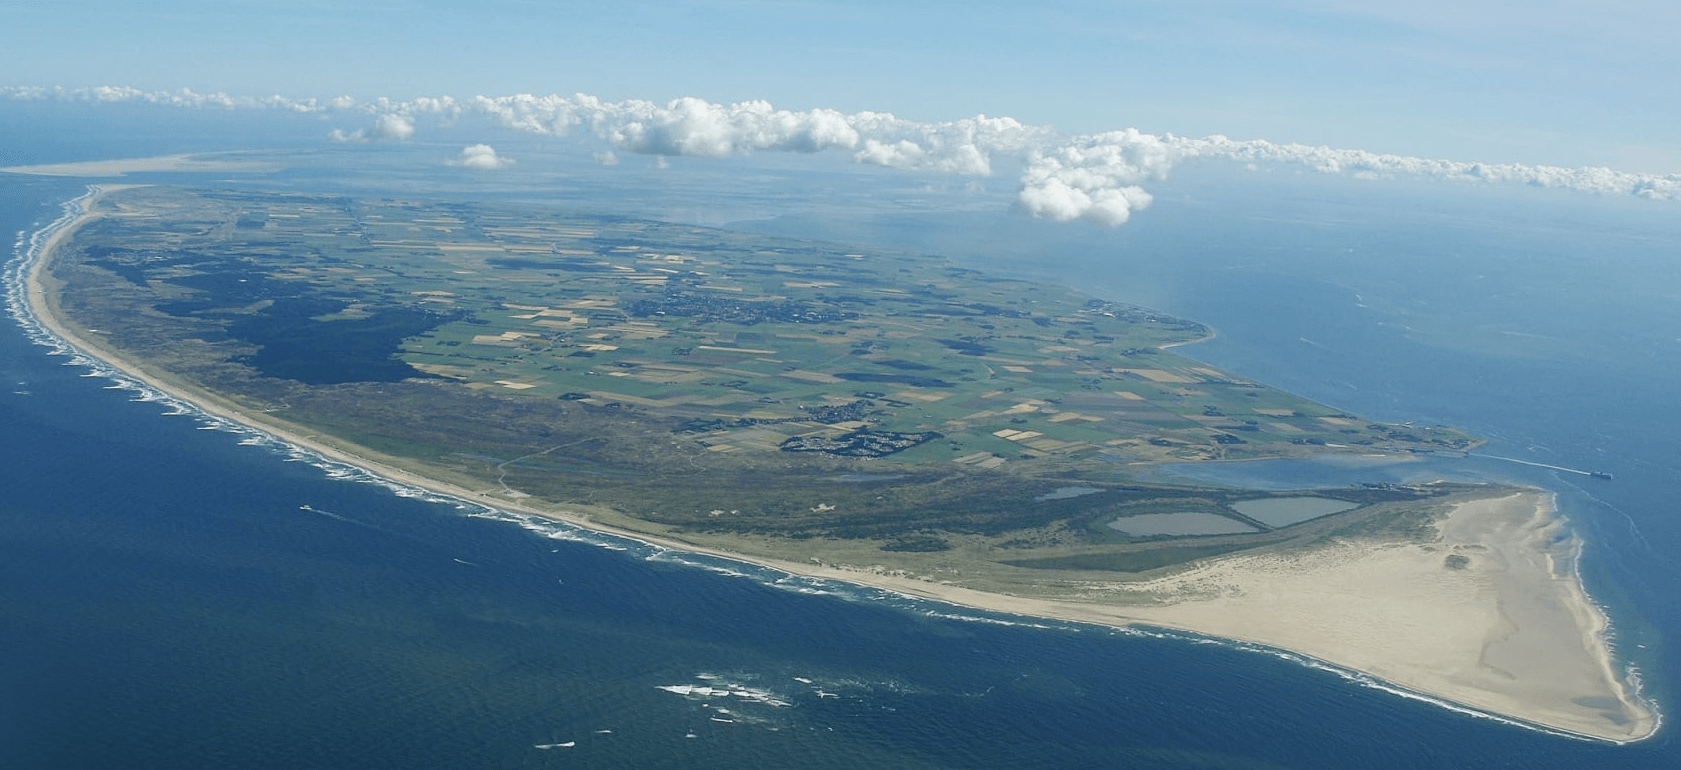 Texel from the air